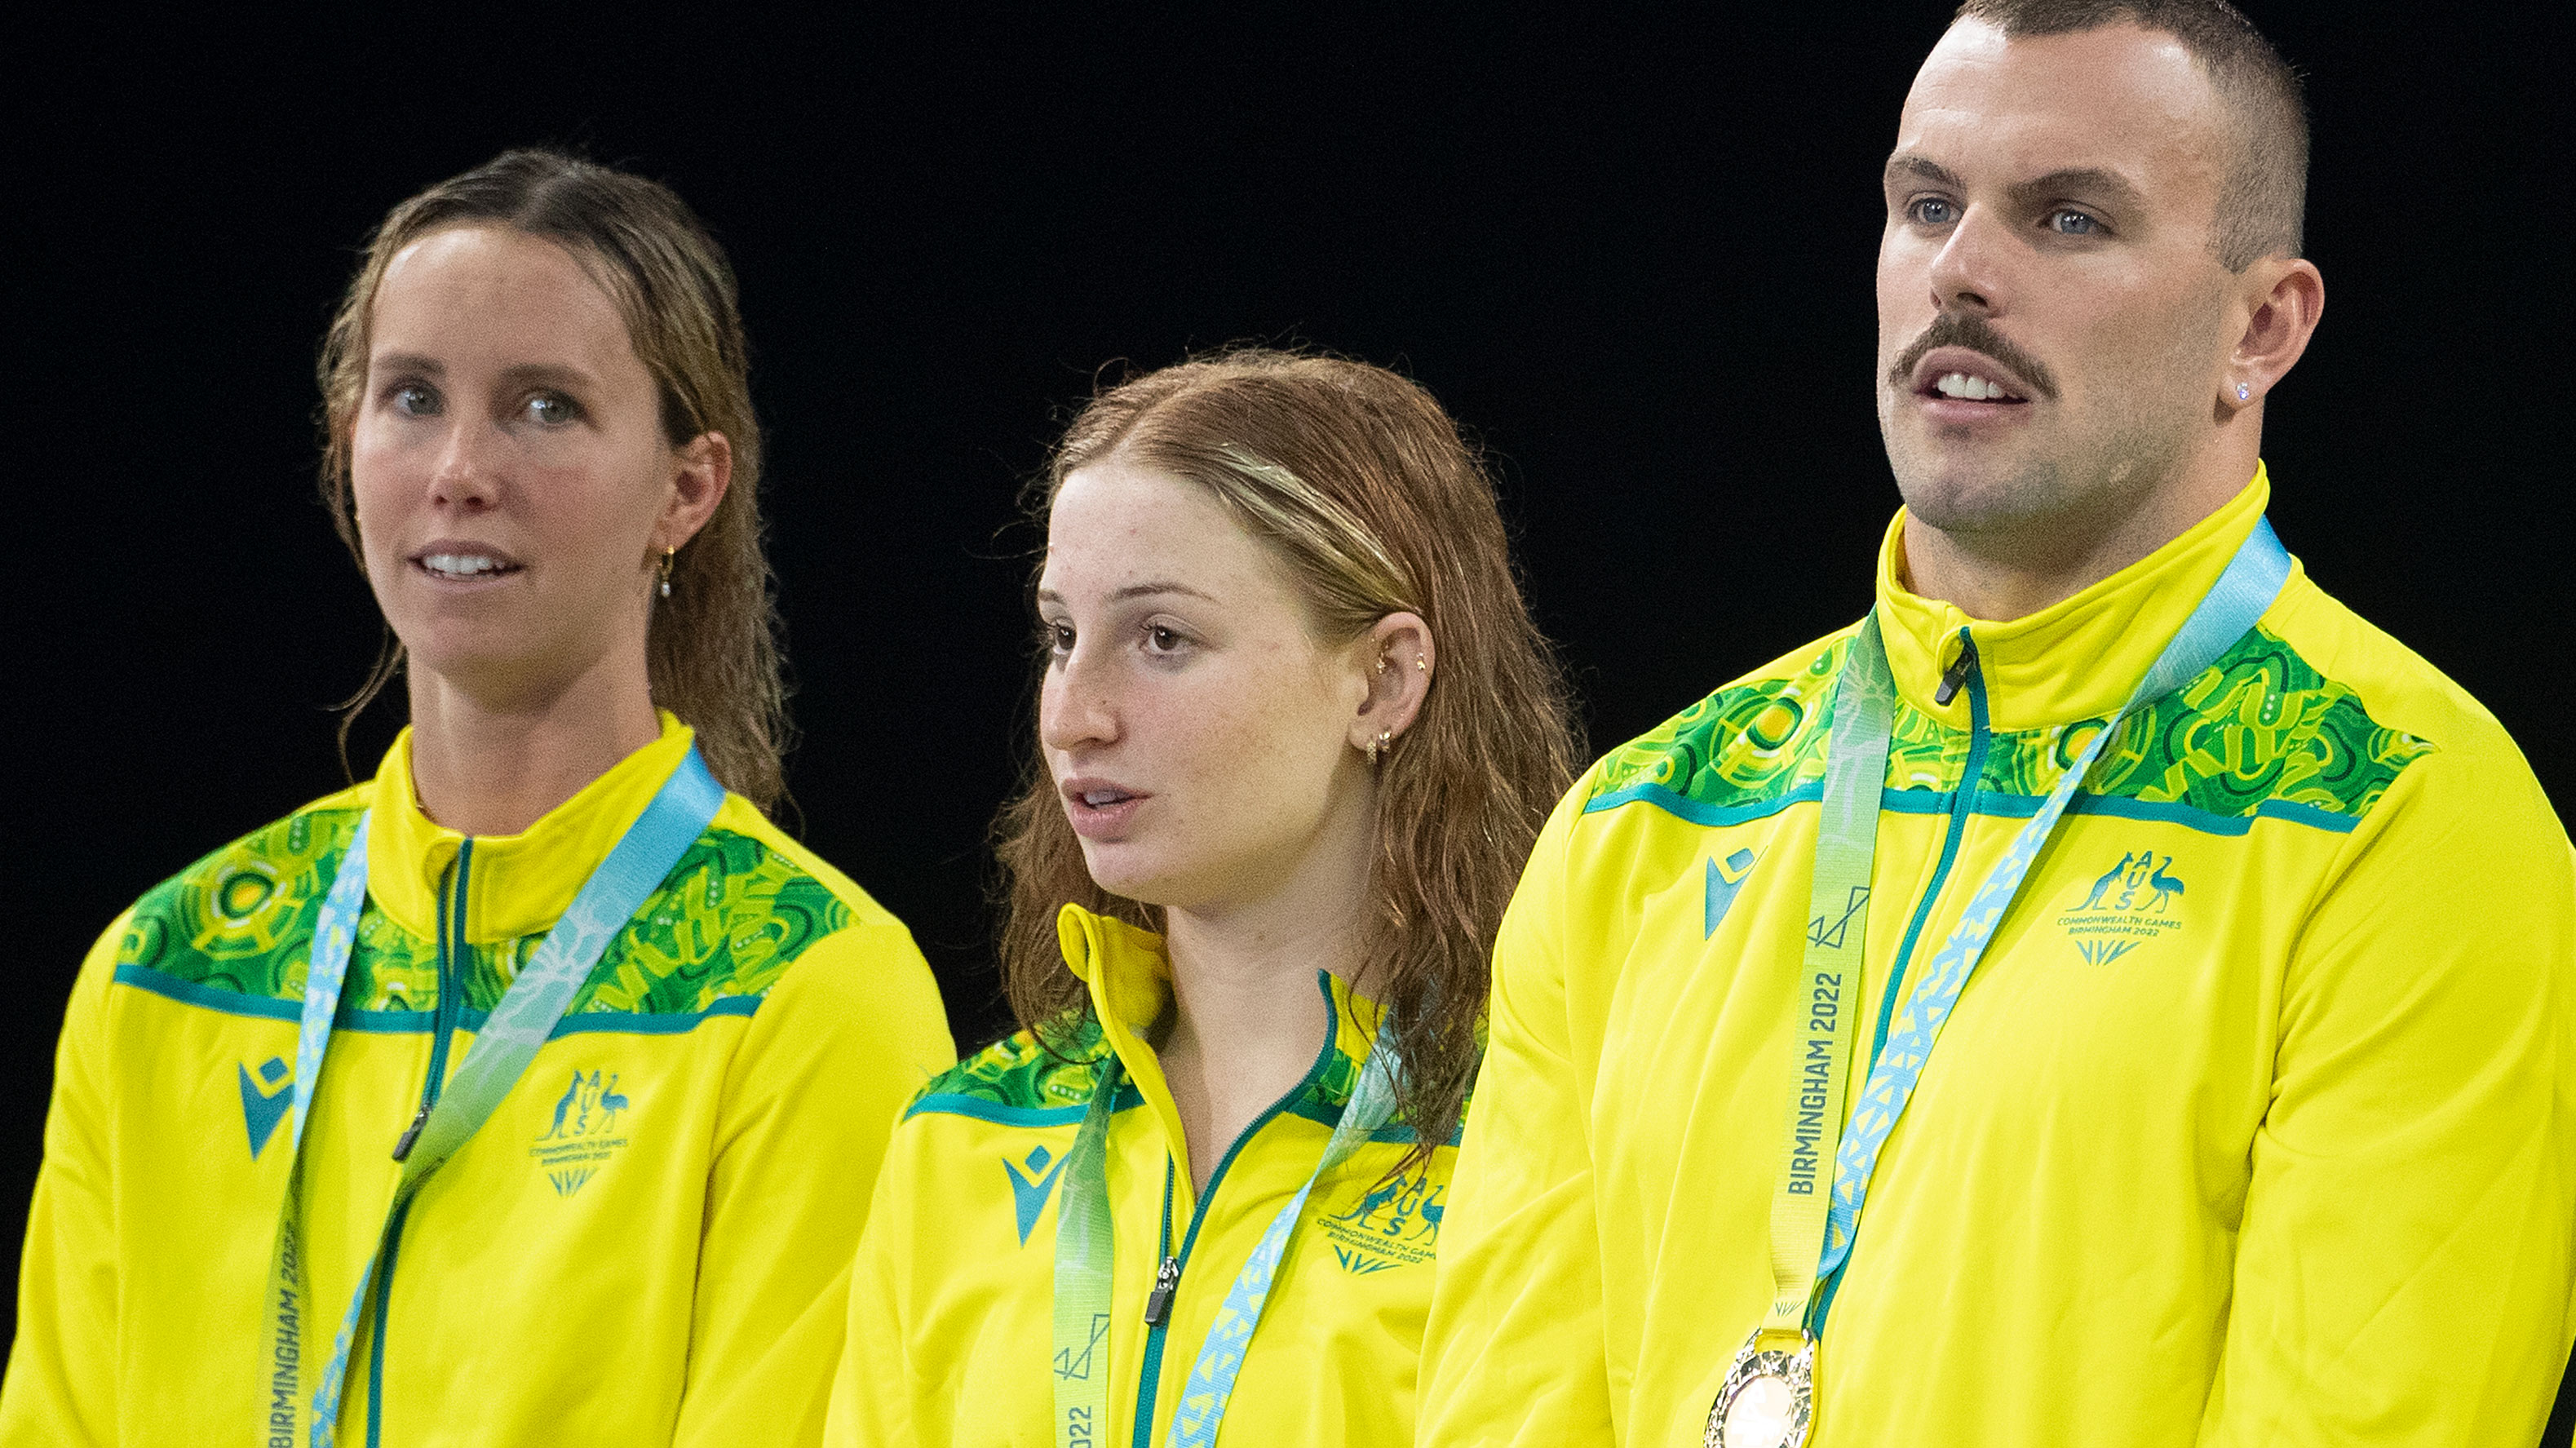 Emma McKeon (left) and Kyle Chalmers (right), are separated on the podium by Mollie O'Callaghan after winning the mixed 4x100m freestyle relay.